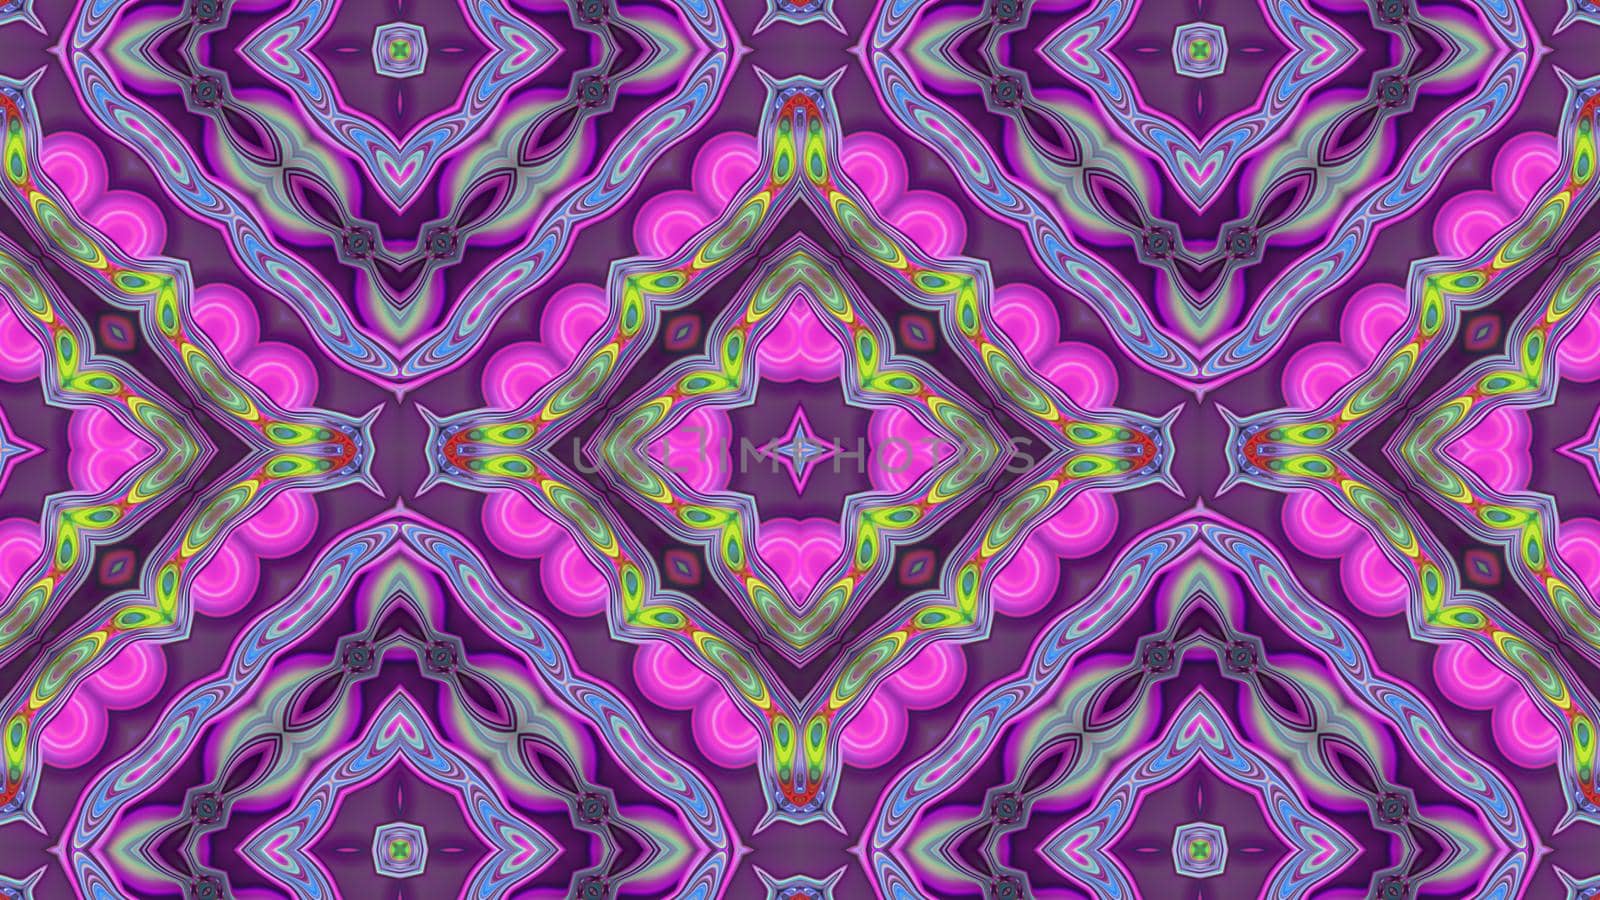 Abstract pink kaleidoscope background with symmetrical pattern